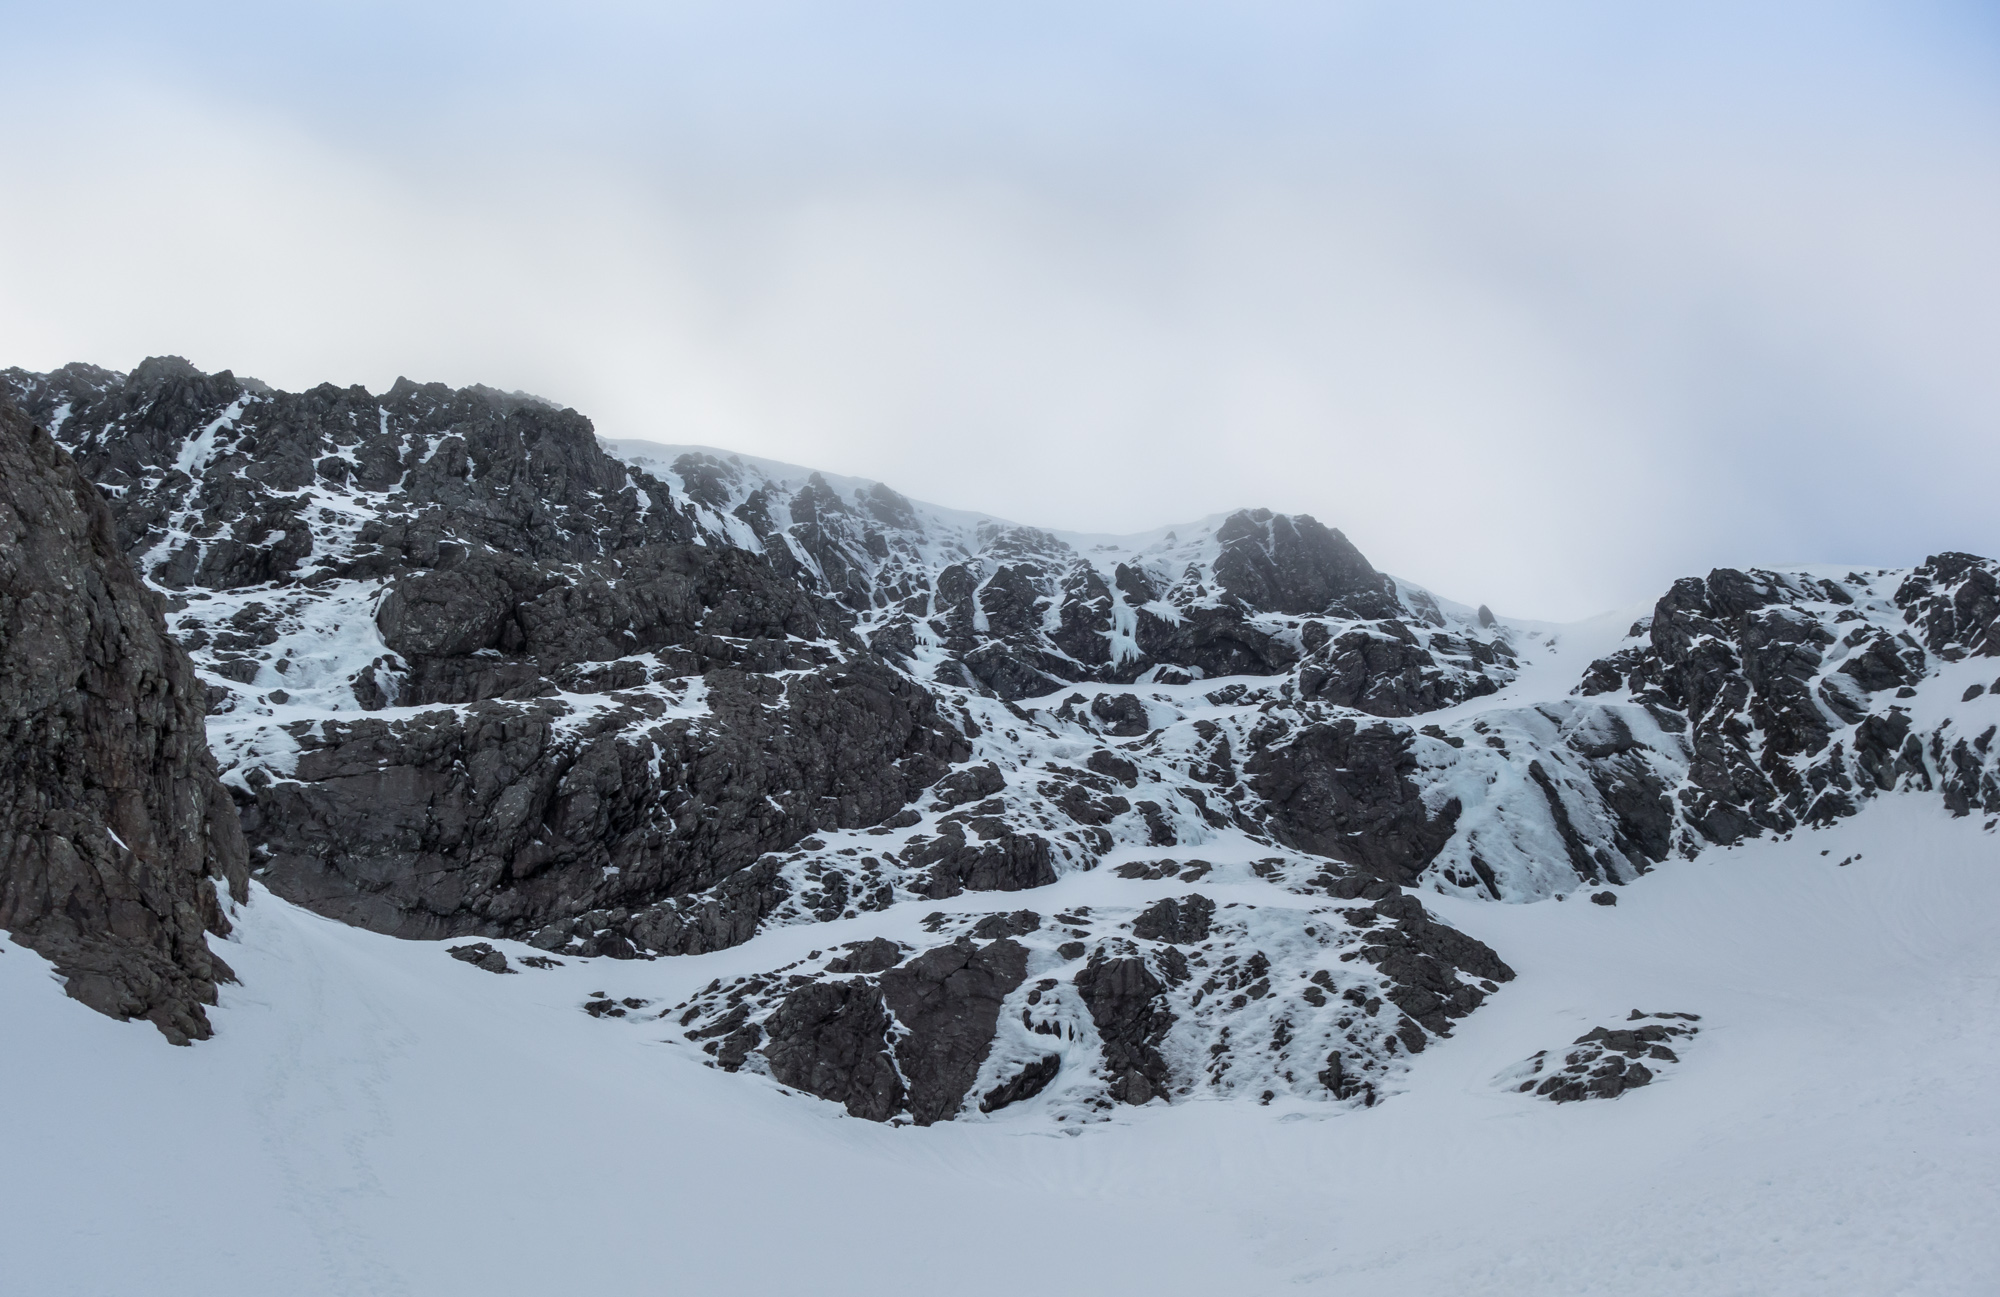 The Gutter and The White Line are the two prominent ice lines on the left of the image on Goodeve's Buttress. A very icy Raeburn's Wall to the right.